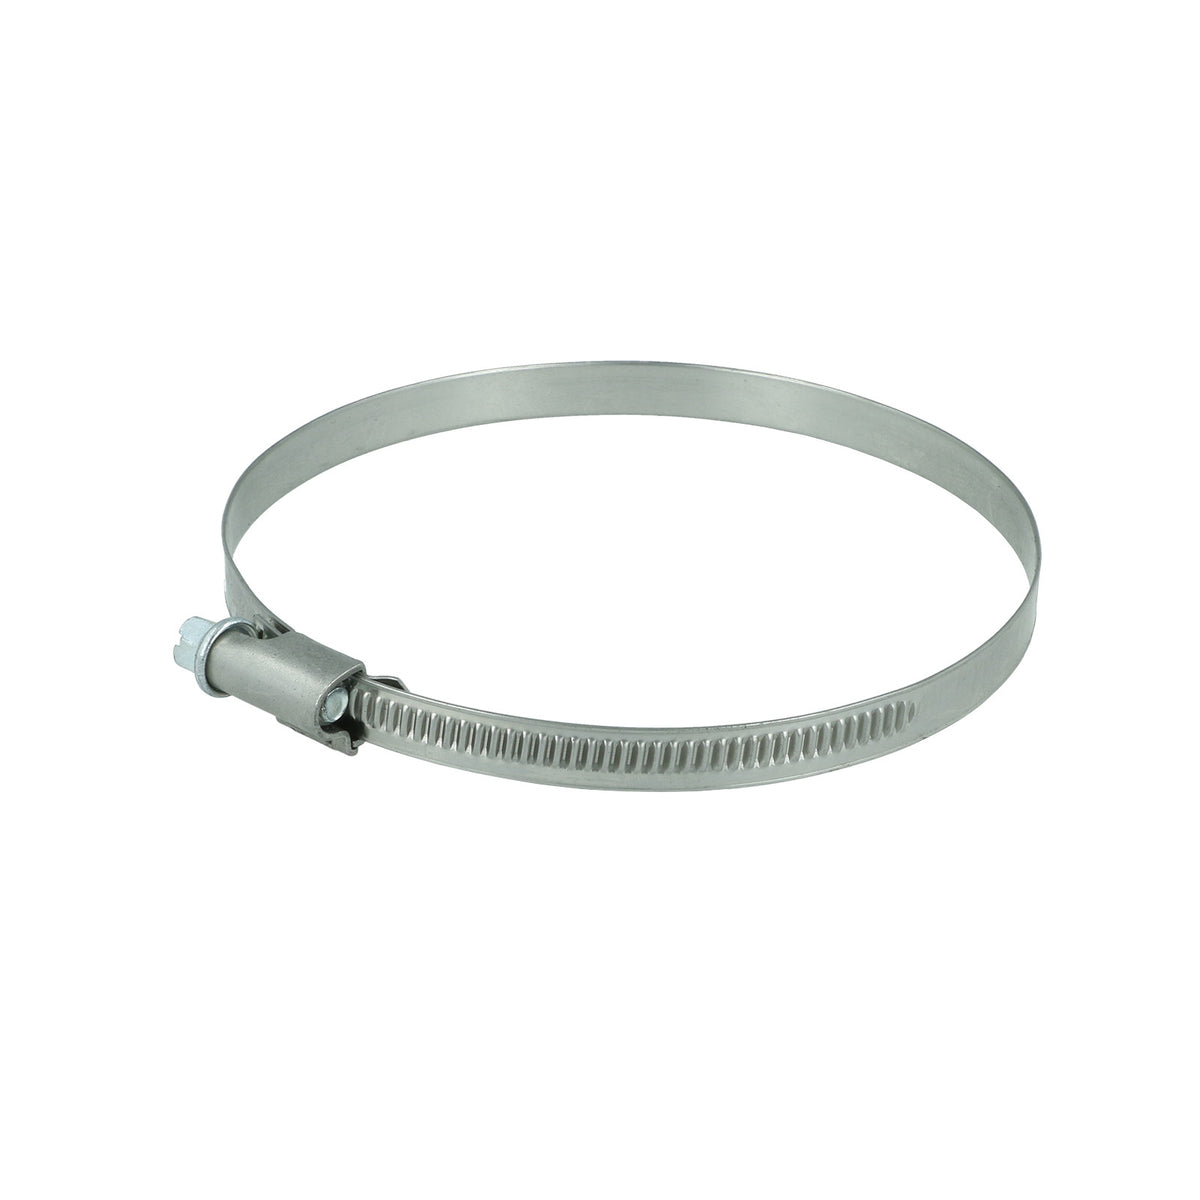 BOOST Products 1/2" Hose Clamp - Stainless Steel Range